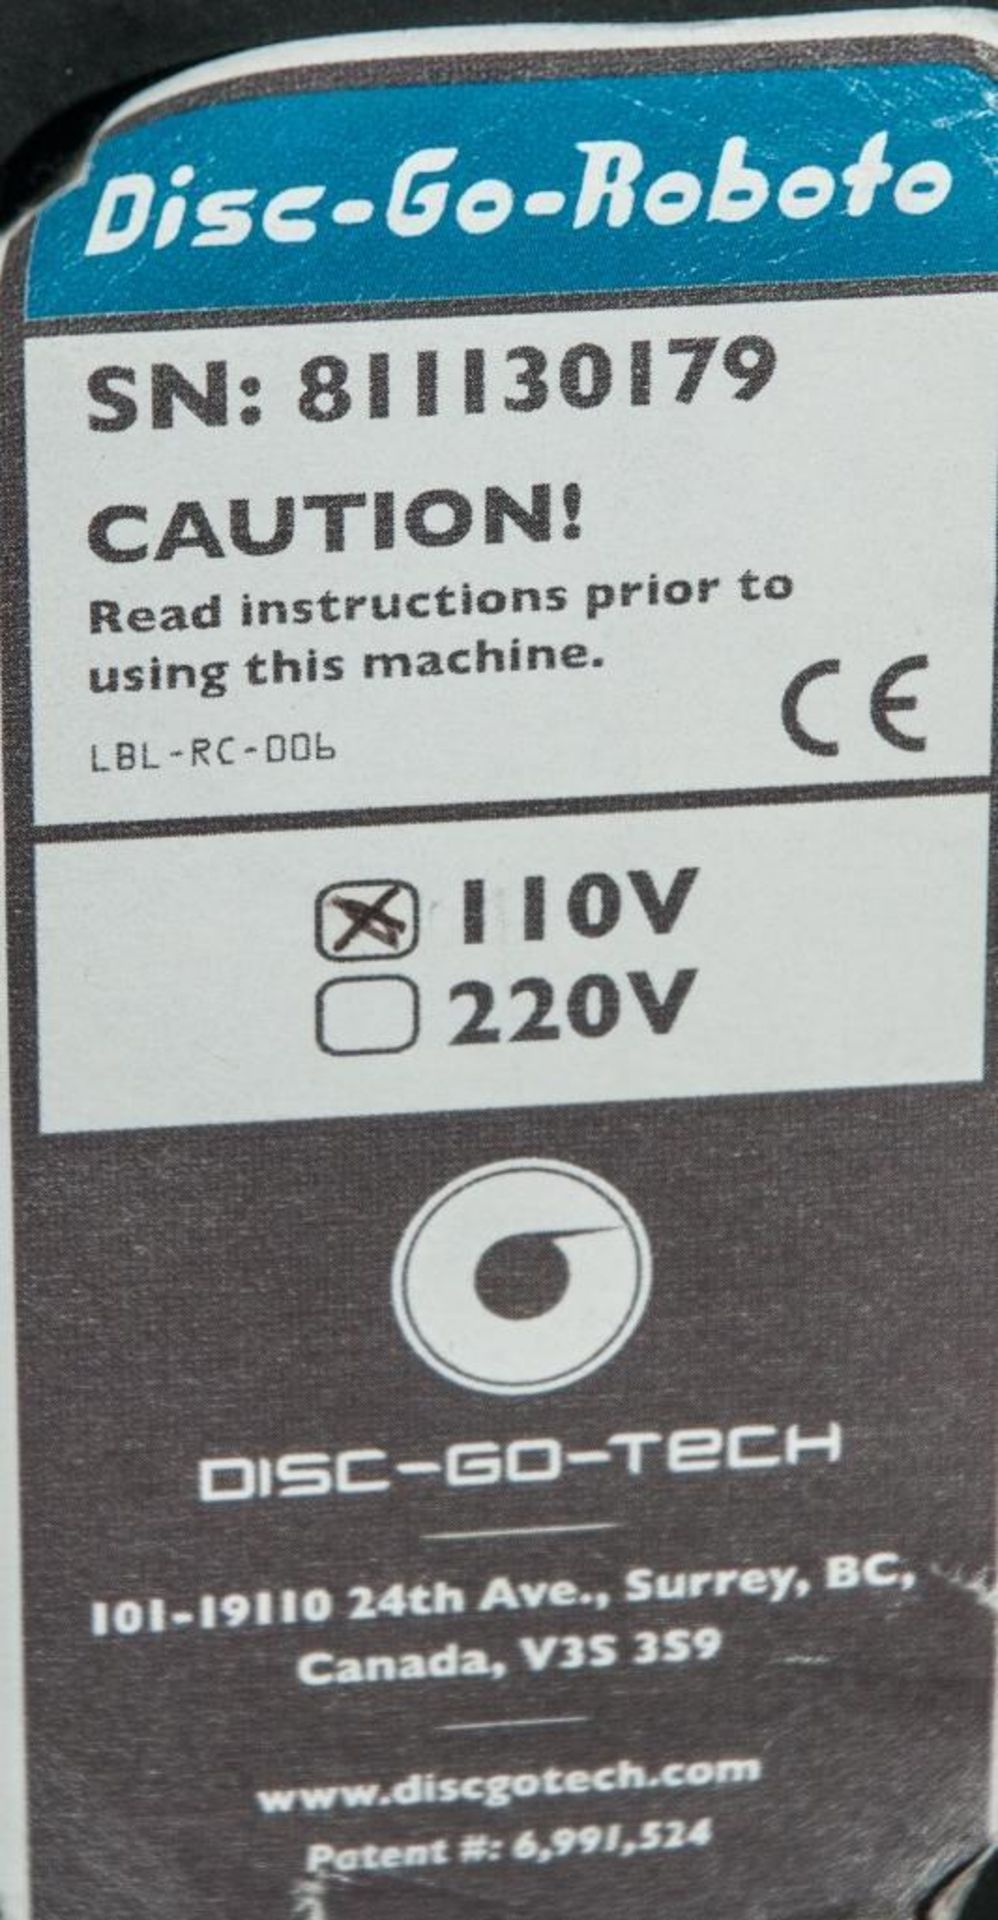 Disc-Go-Roboto 110v Serial#811130179 No Arm, Can Be Used Manual Feed Demo Test Machine - Image 2 of 2